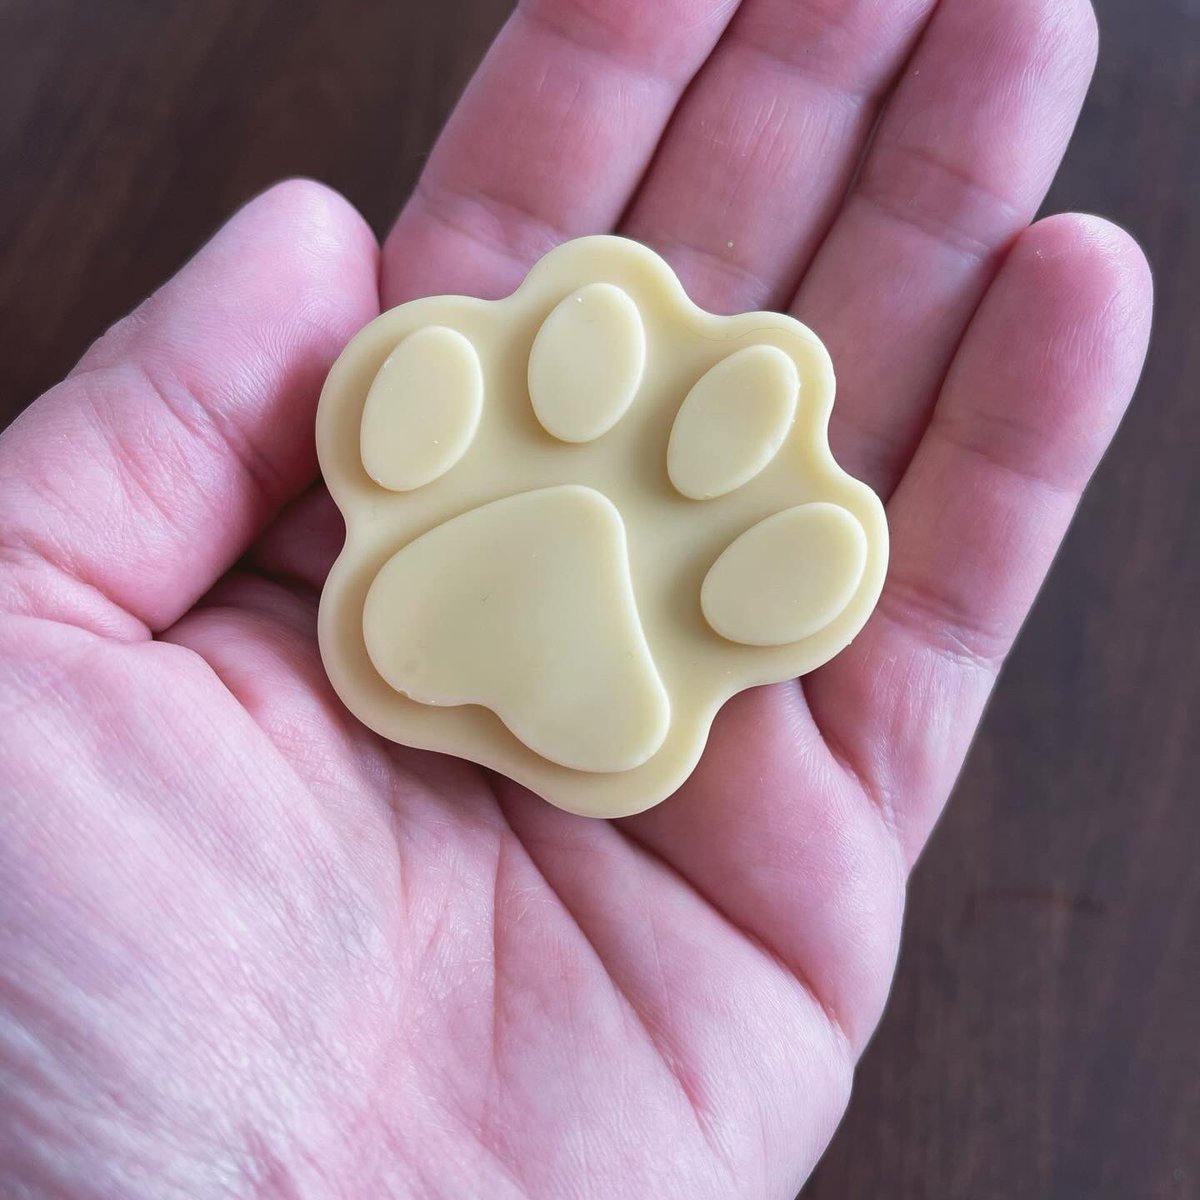 🐾 Introducing our All-Natural Unscented Soap Bars for your furry friends! 🐶 

Crafted with natural ingredients, our formula is gentle on sensitive skin, leaving your dog’s coat soft, shiny, and smelling fresh – without any fragrance. 🐾#PetCare #NaturalSoap #DogLovers